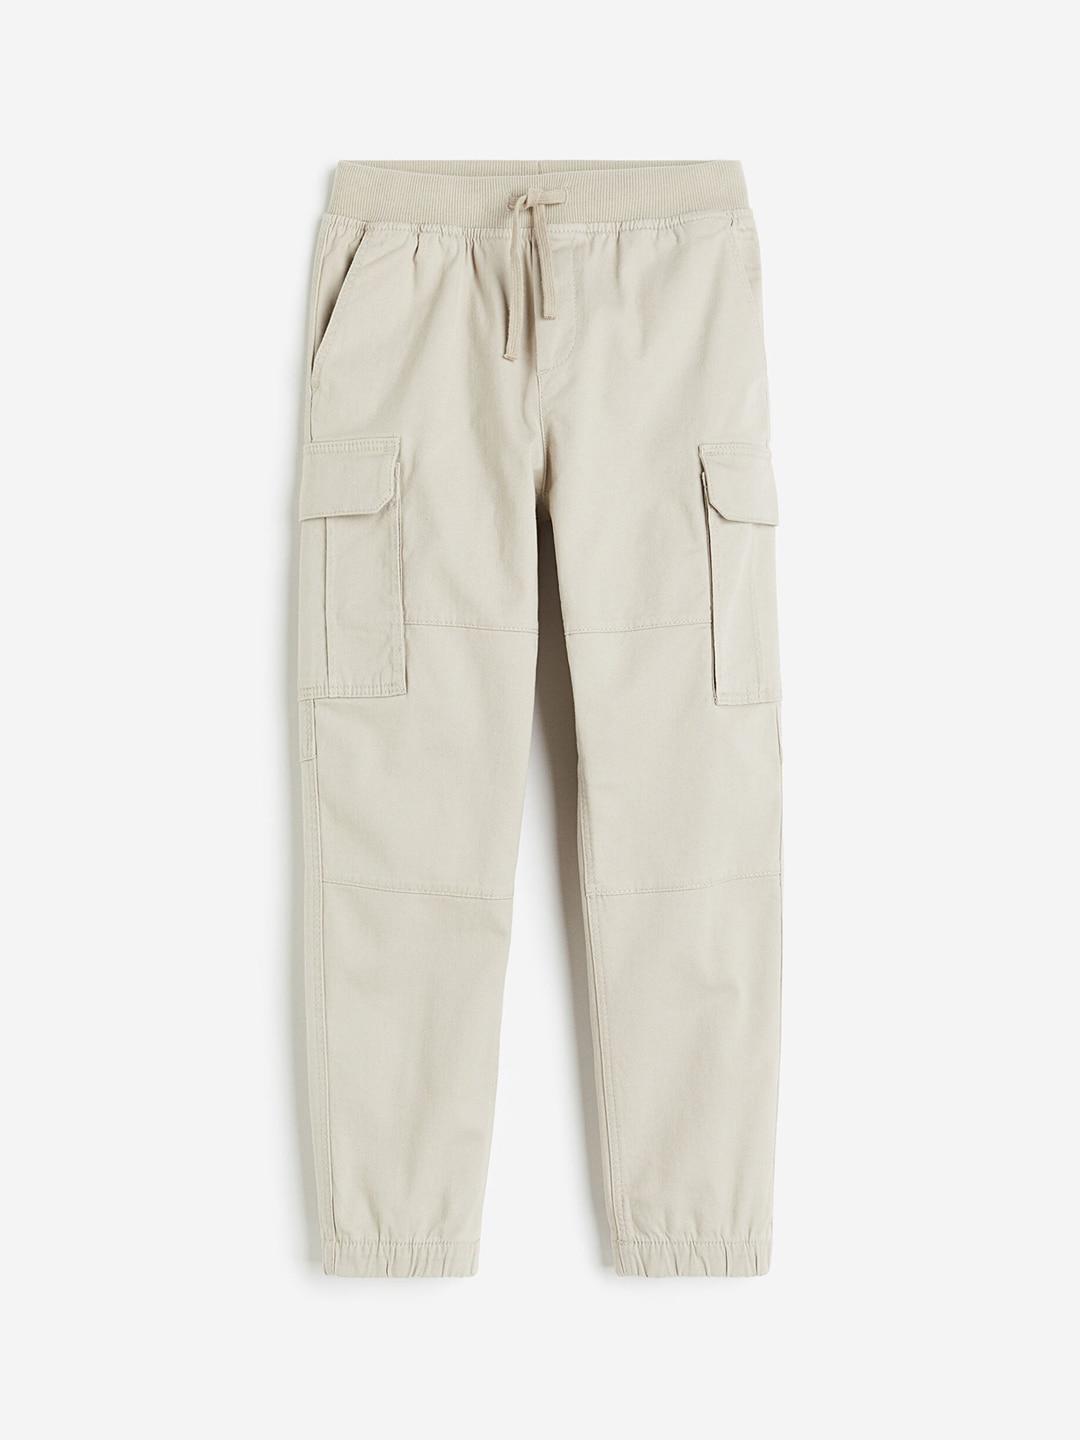 H&M Cargo Trousers